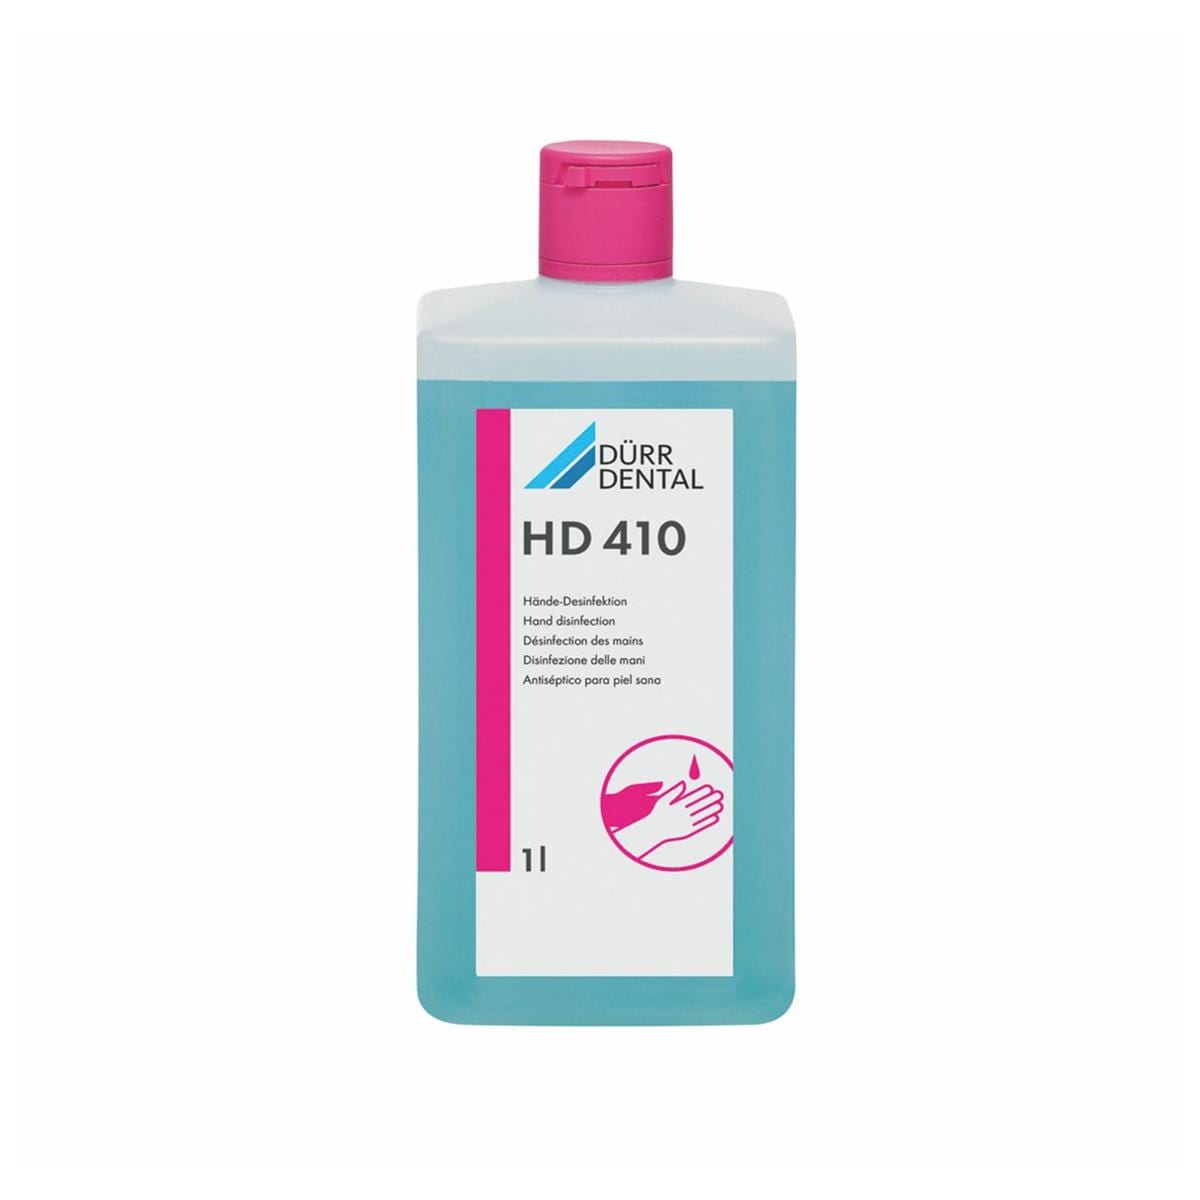 HD 410 Hand Disinfection 1L Bottle